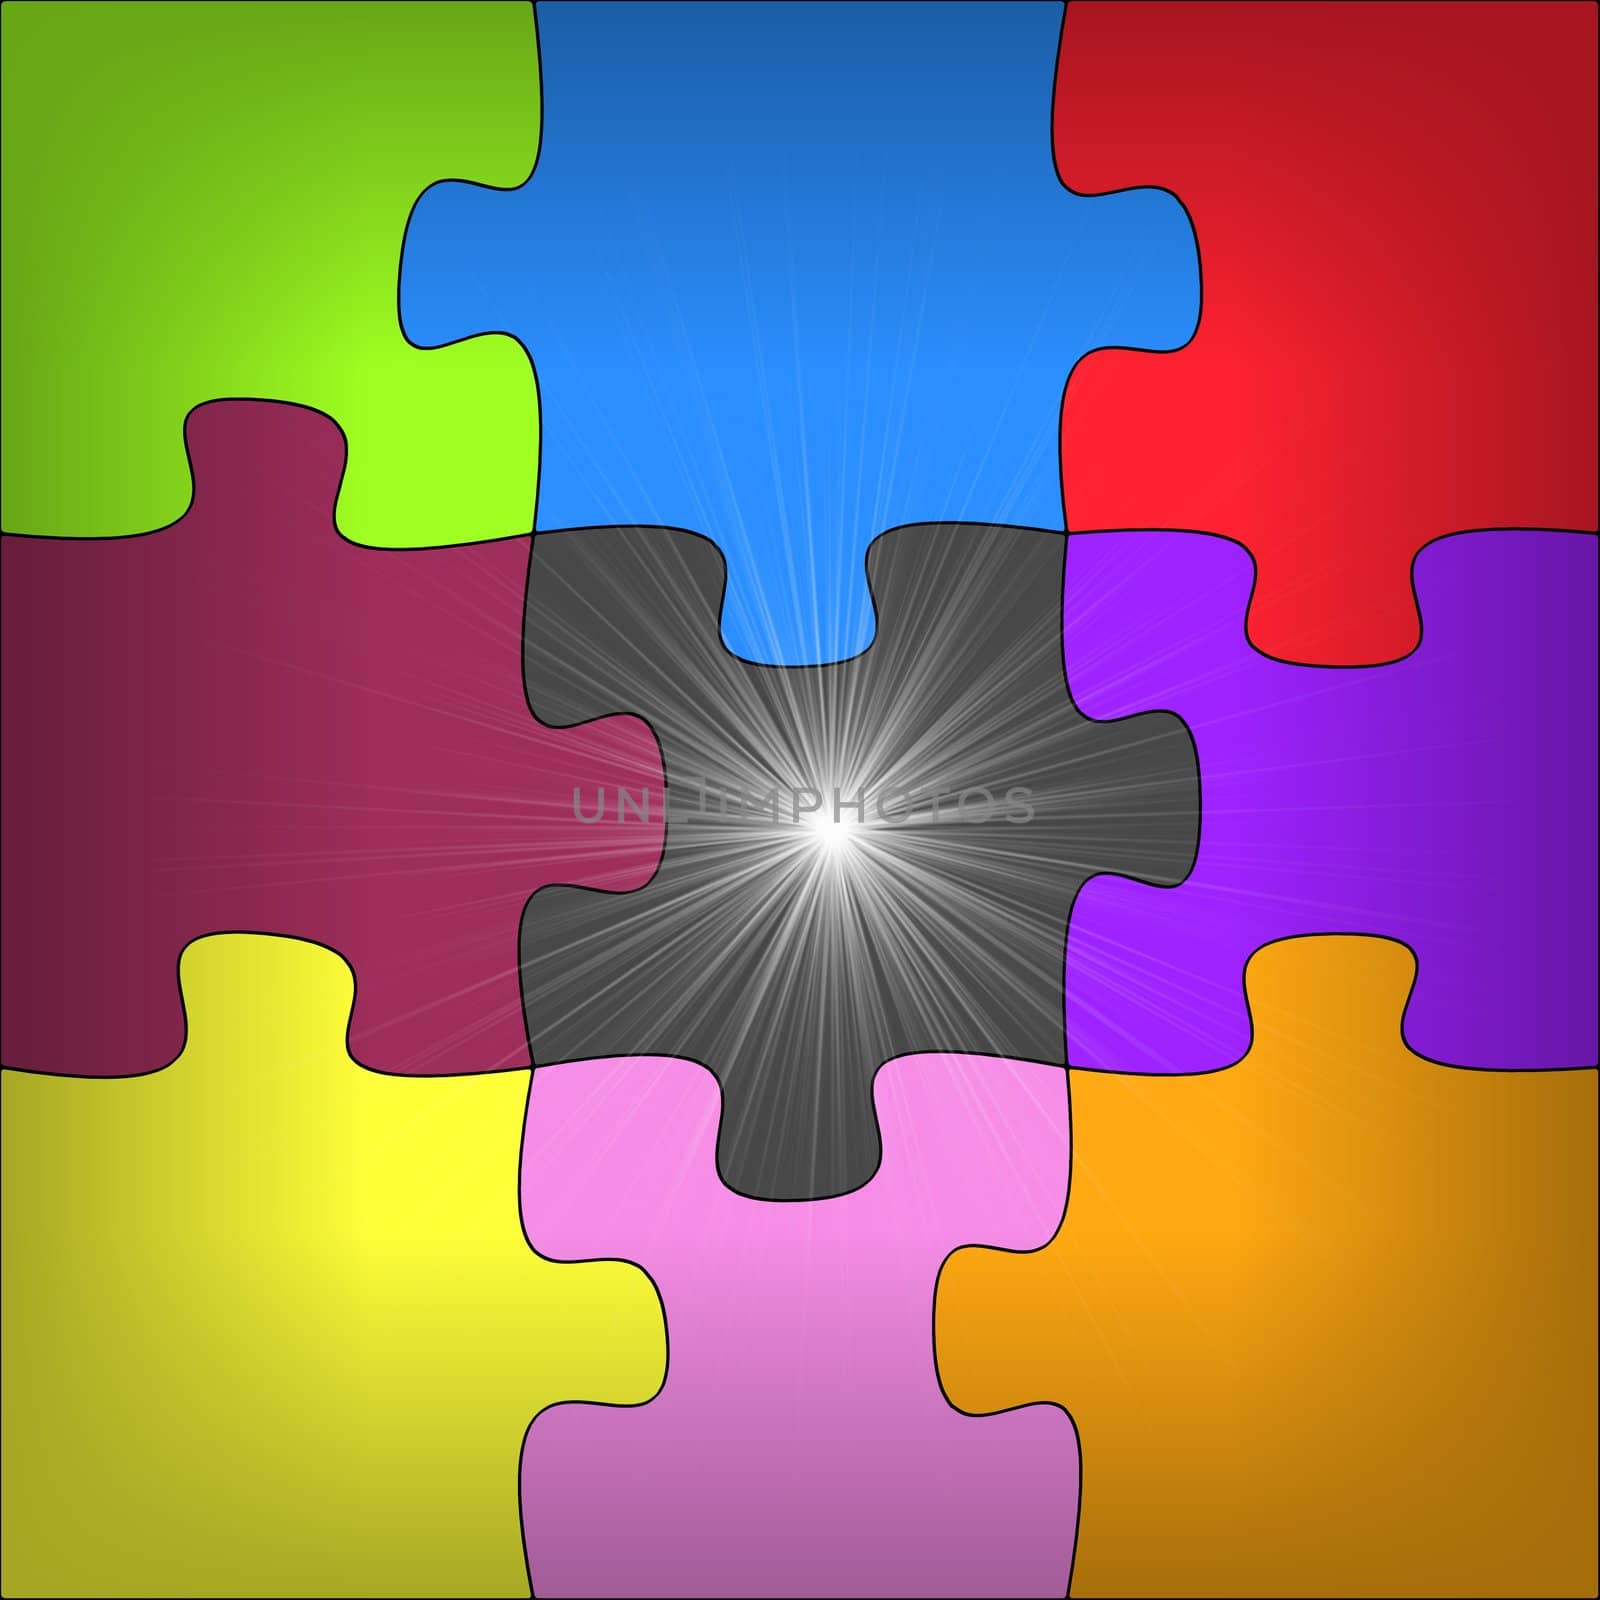 Illustration of a puzzle with one piece missing